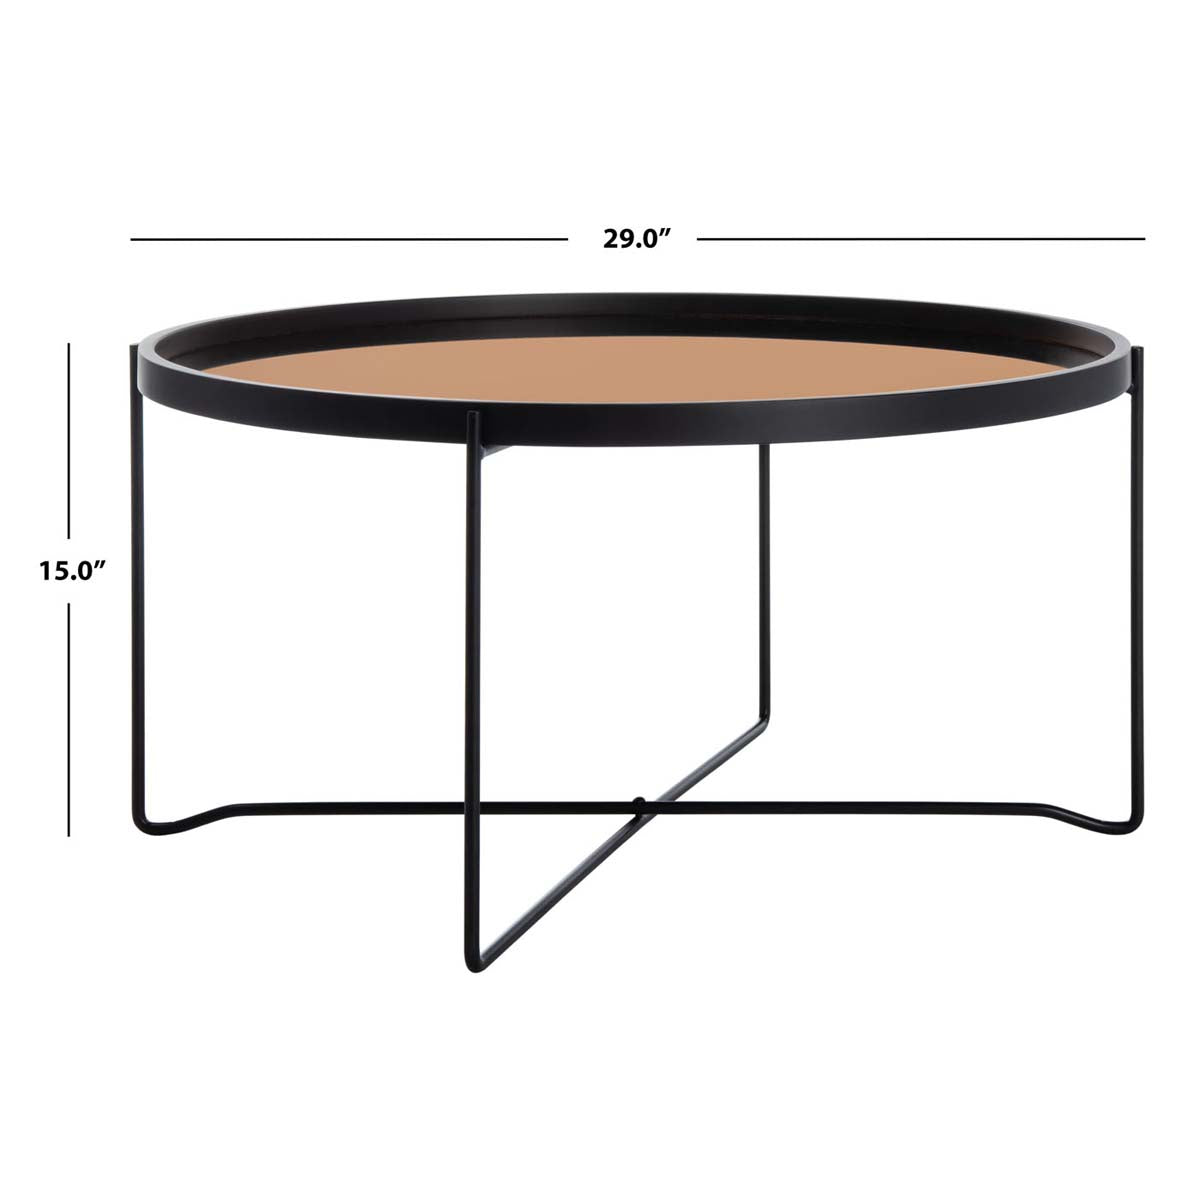 Safavieh Ruby Round Tray Top Coffee Table , COF4205 - Rose Gold/Black